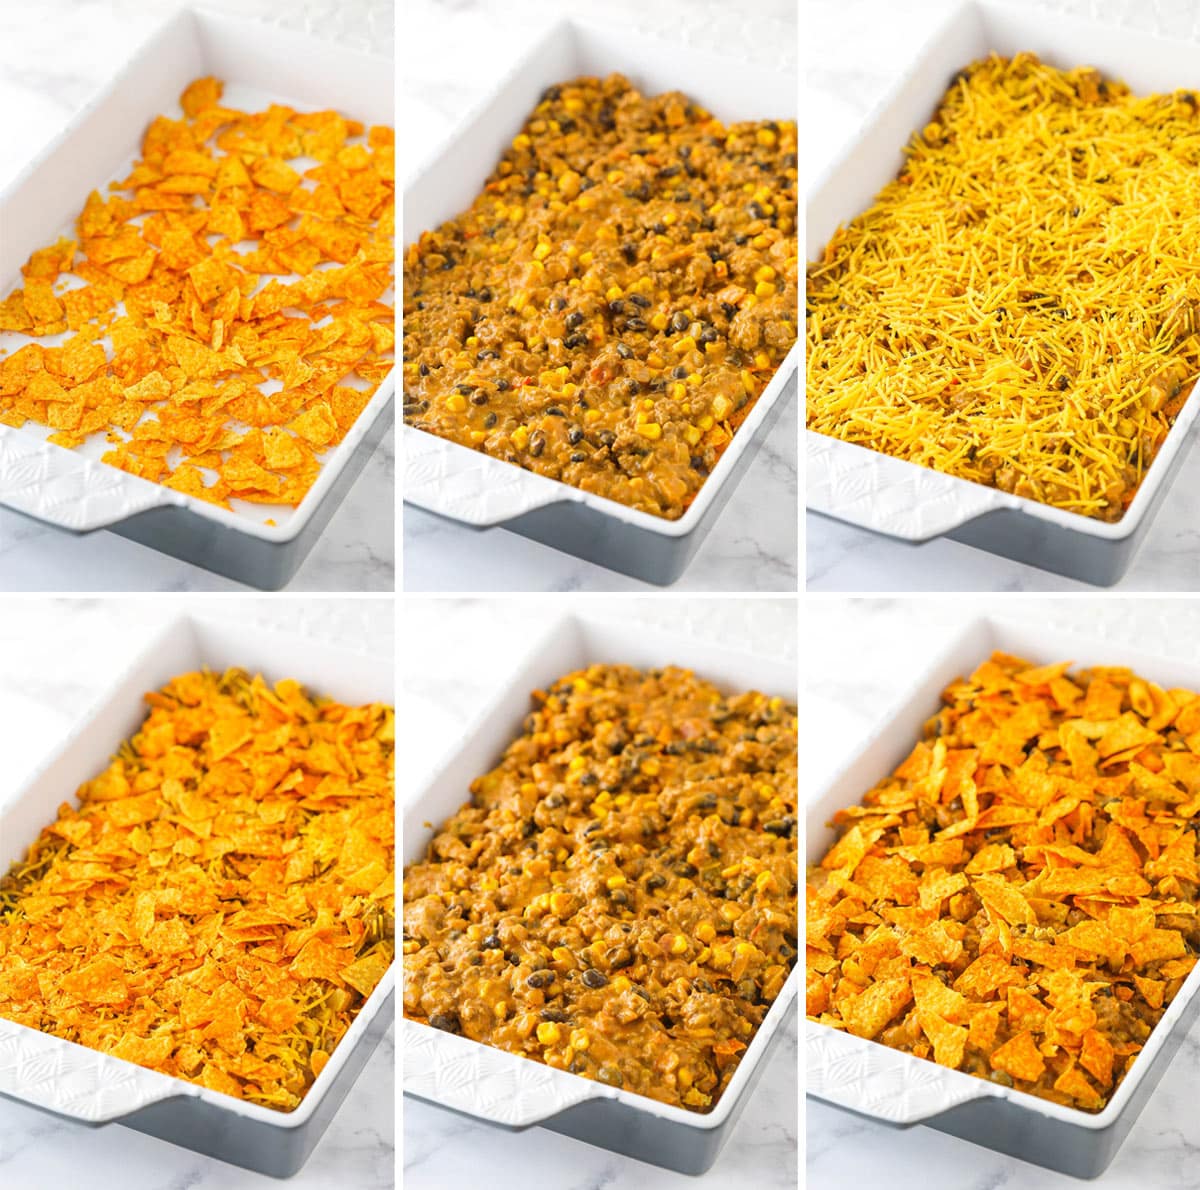 Stages of baking Dorito casserole.